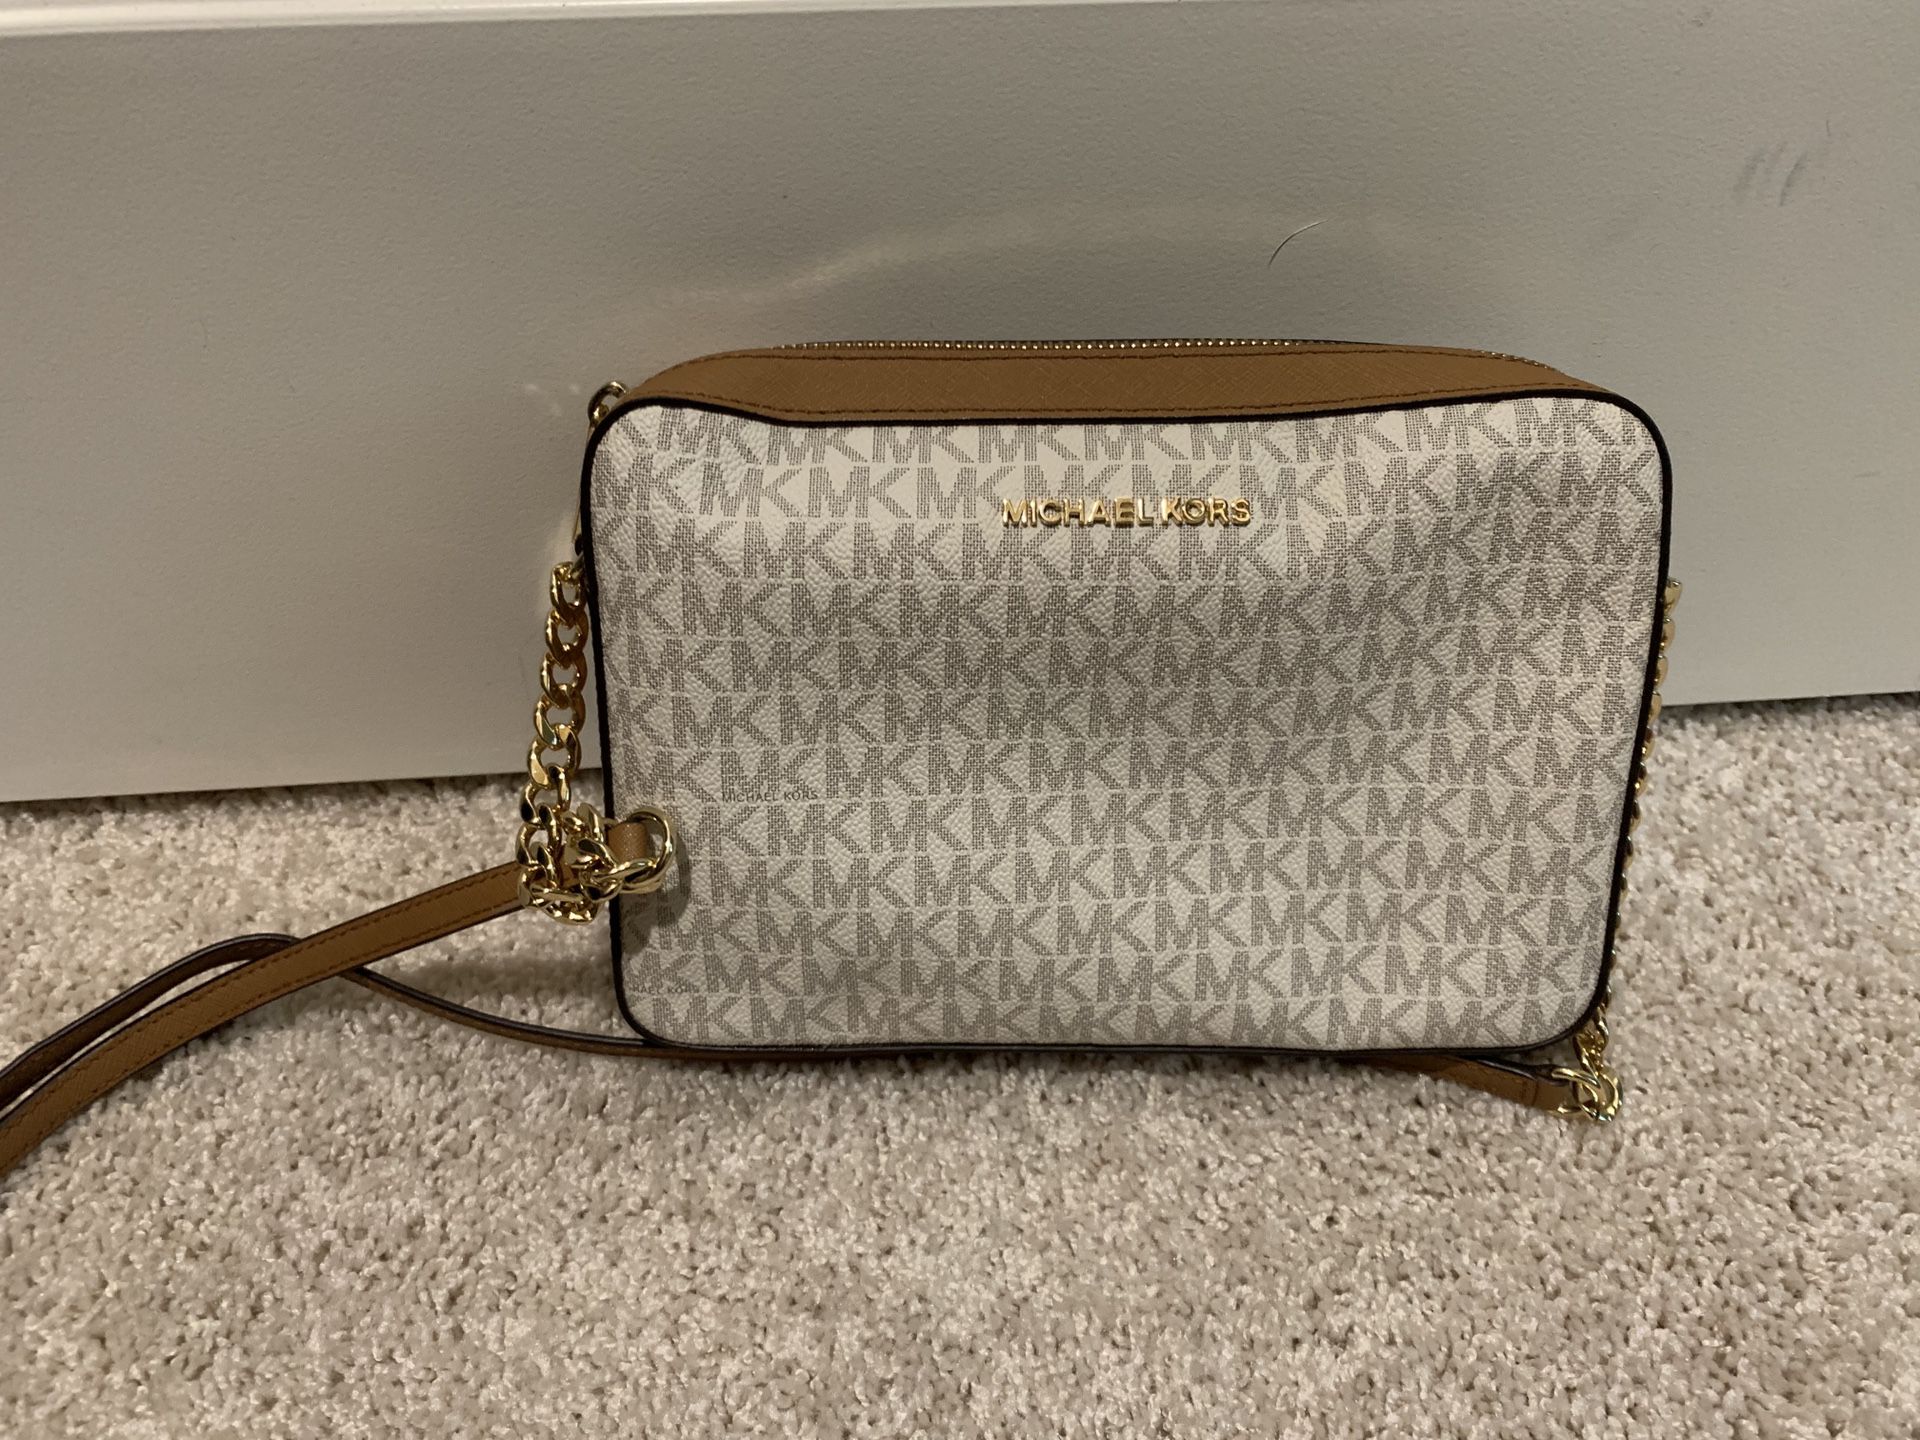 Authentic MK purse. Brown/tanish white cross body. Brand new and never used. Need gone ASAP. Make an offer